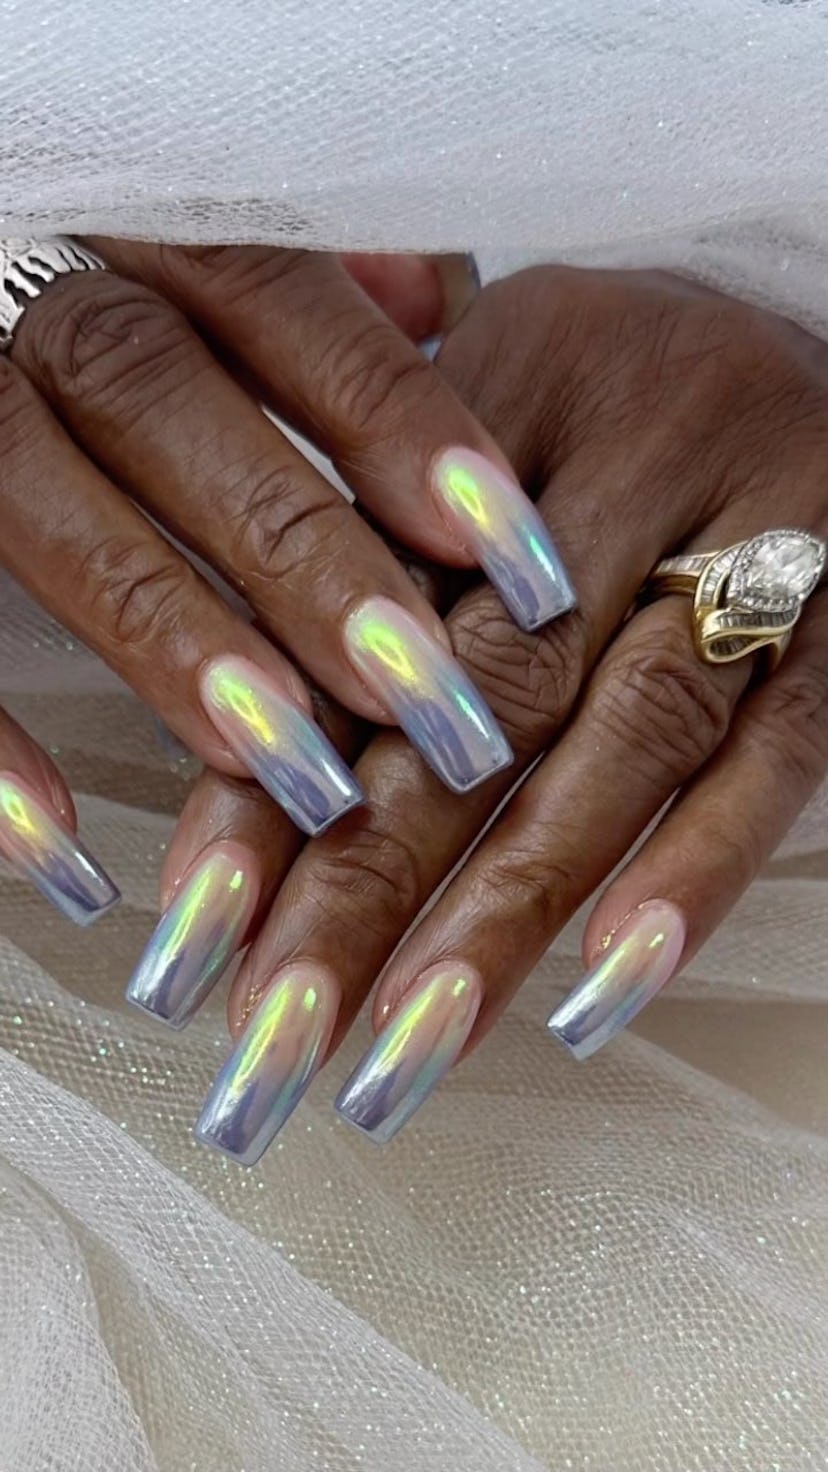 Two-tone holographic chrome.